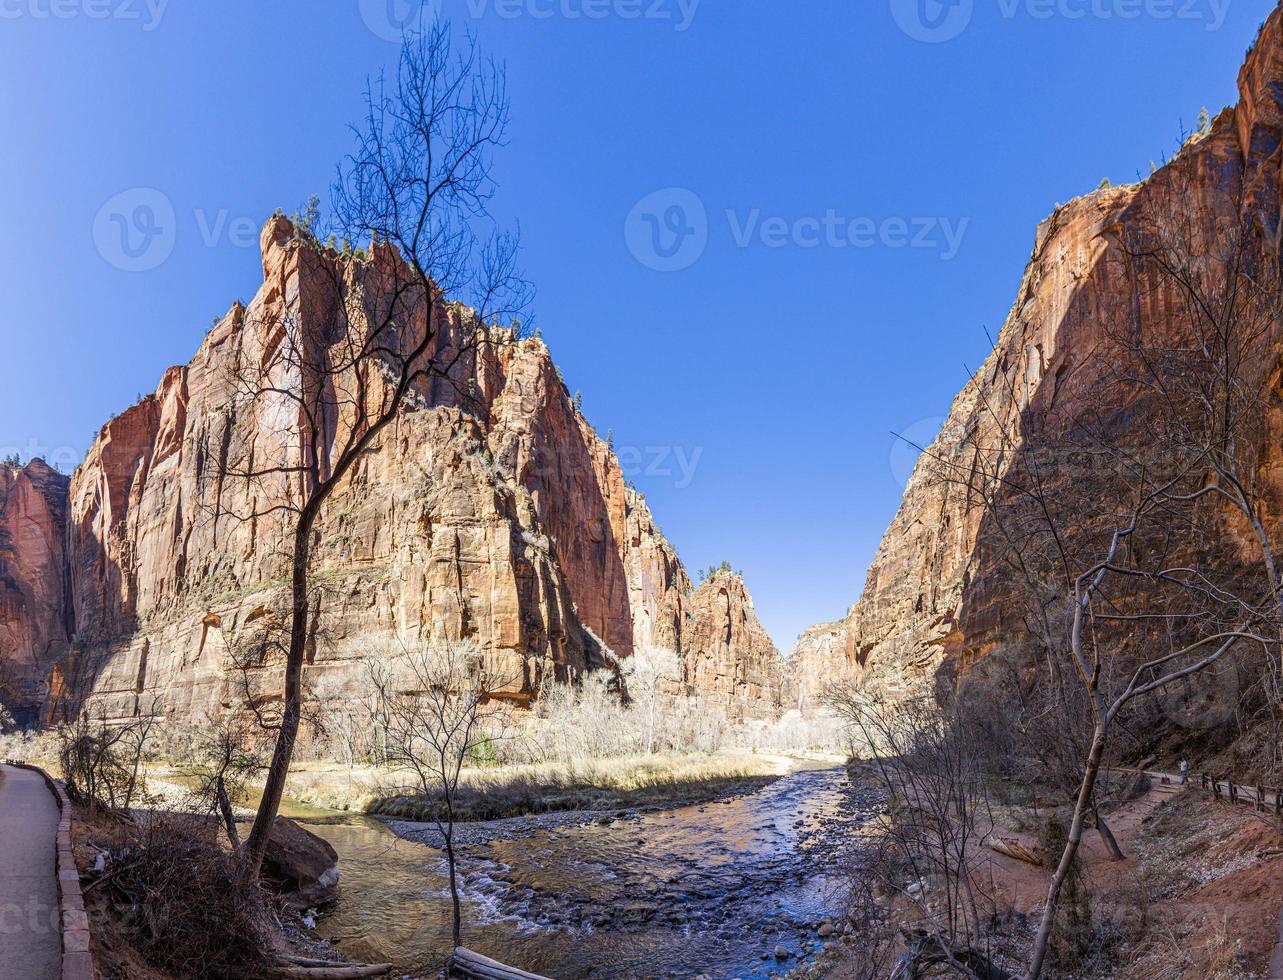 Impression from Virgin river walking path in the Zion National Park in winter photo